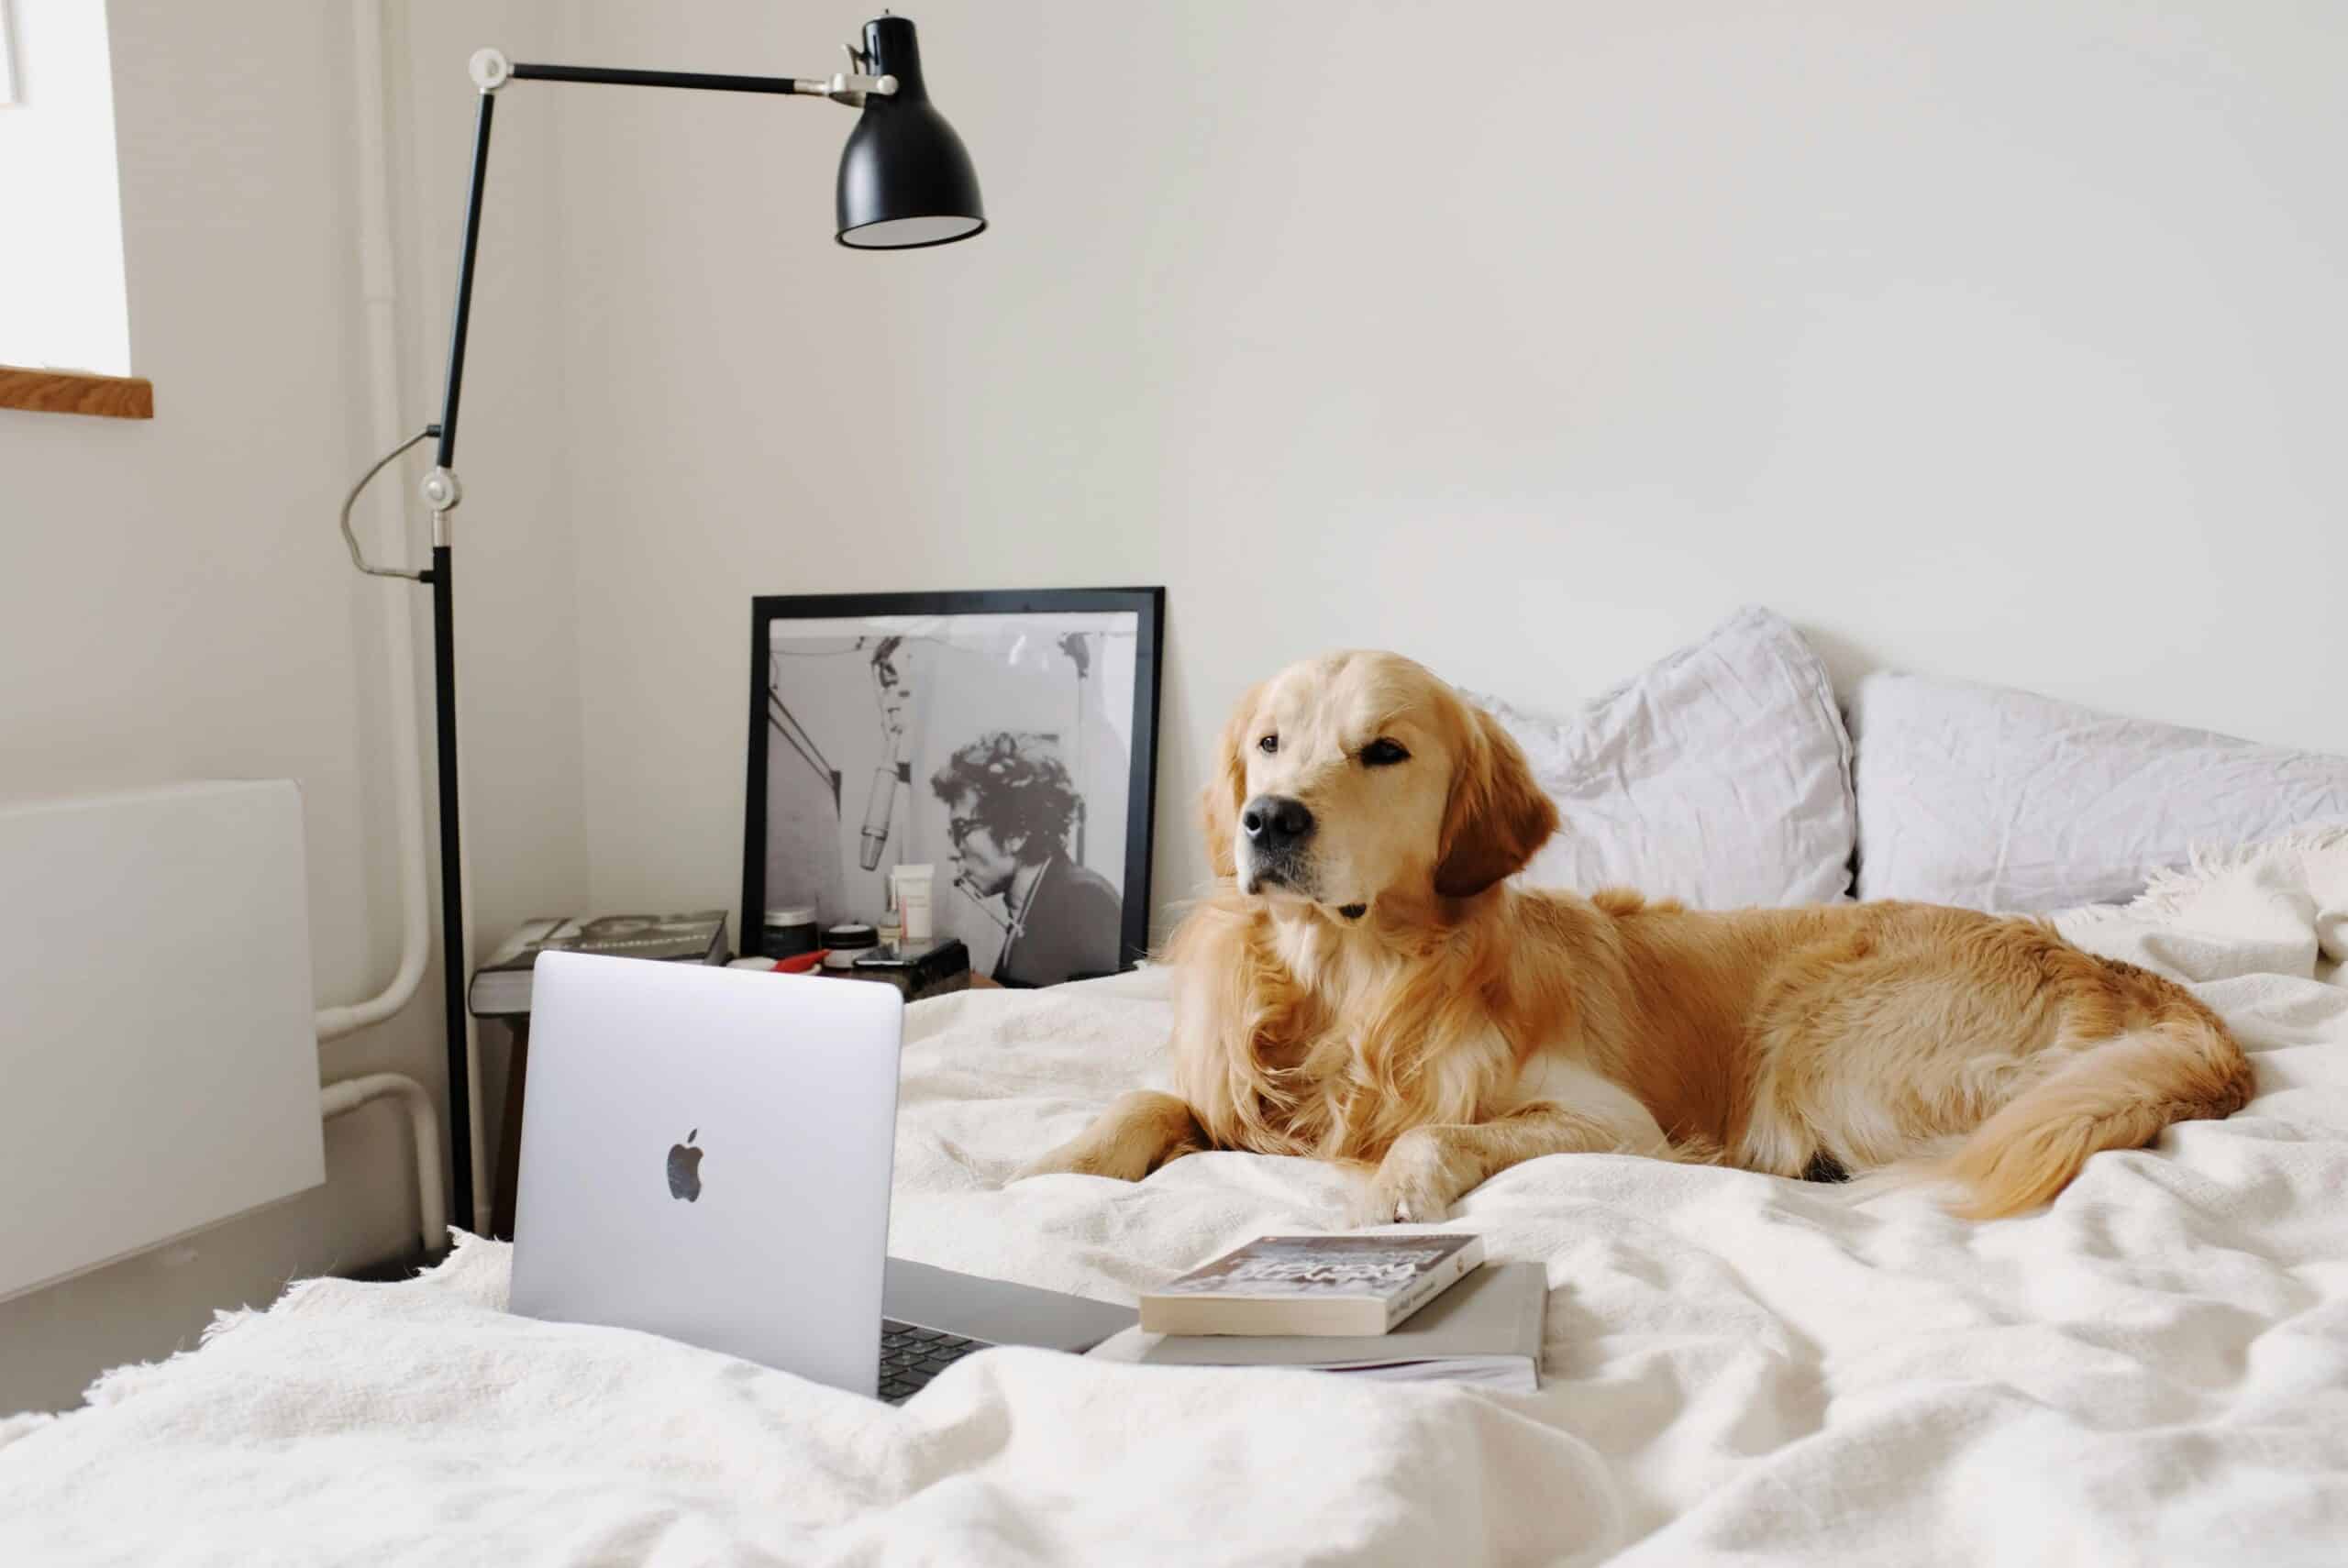 dog looking at computer for all the promotions and rebates for HVAC